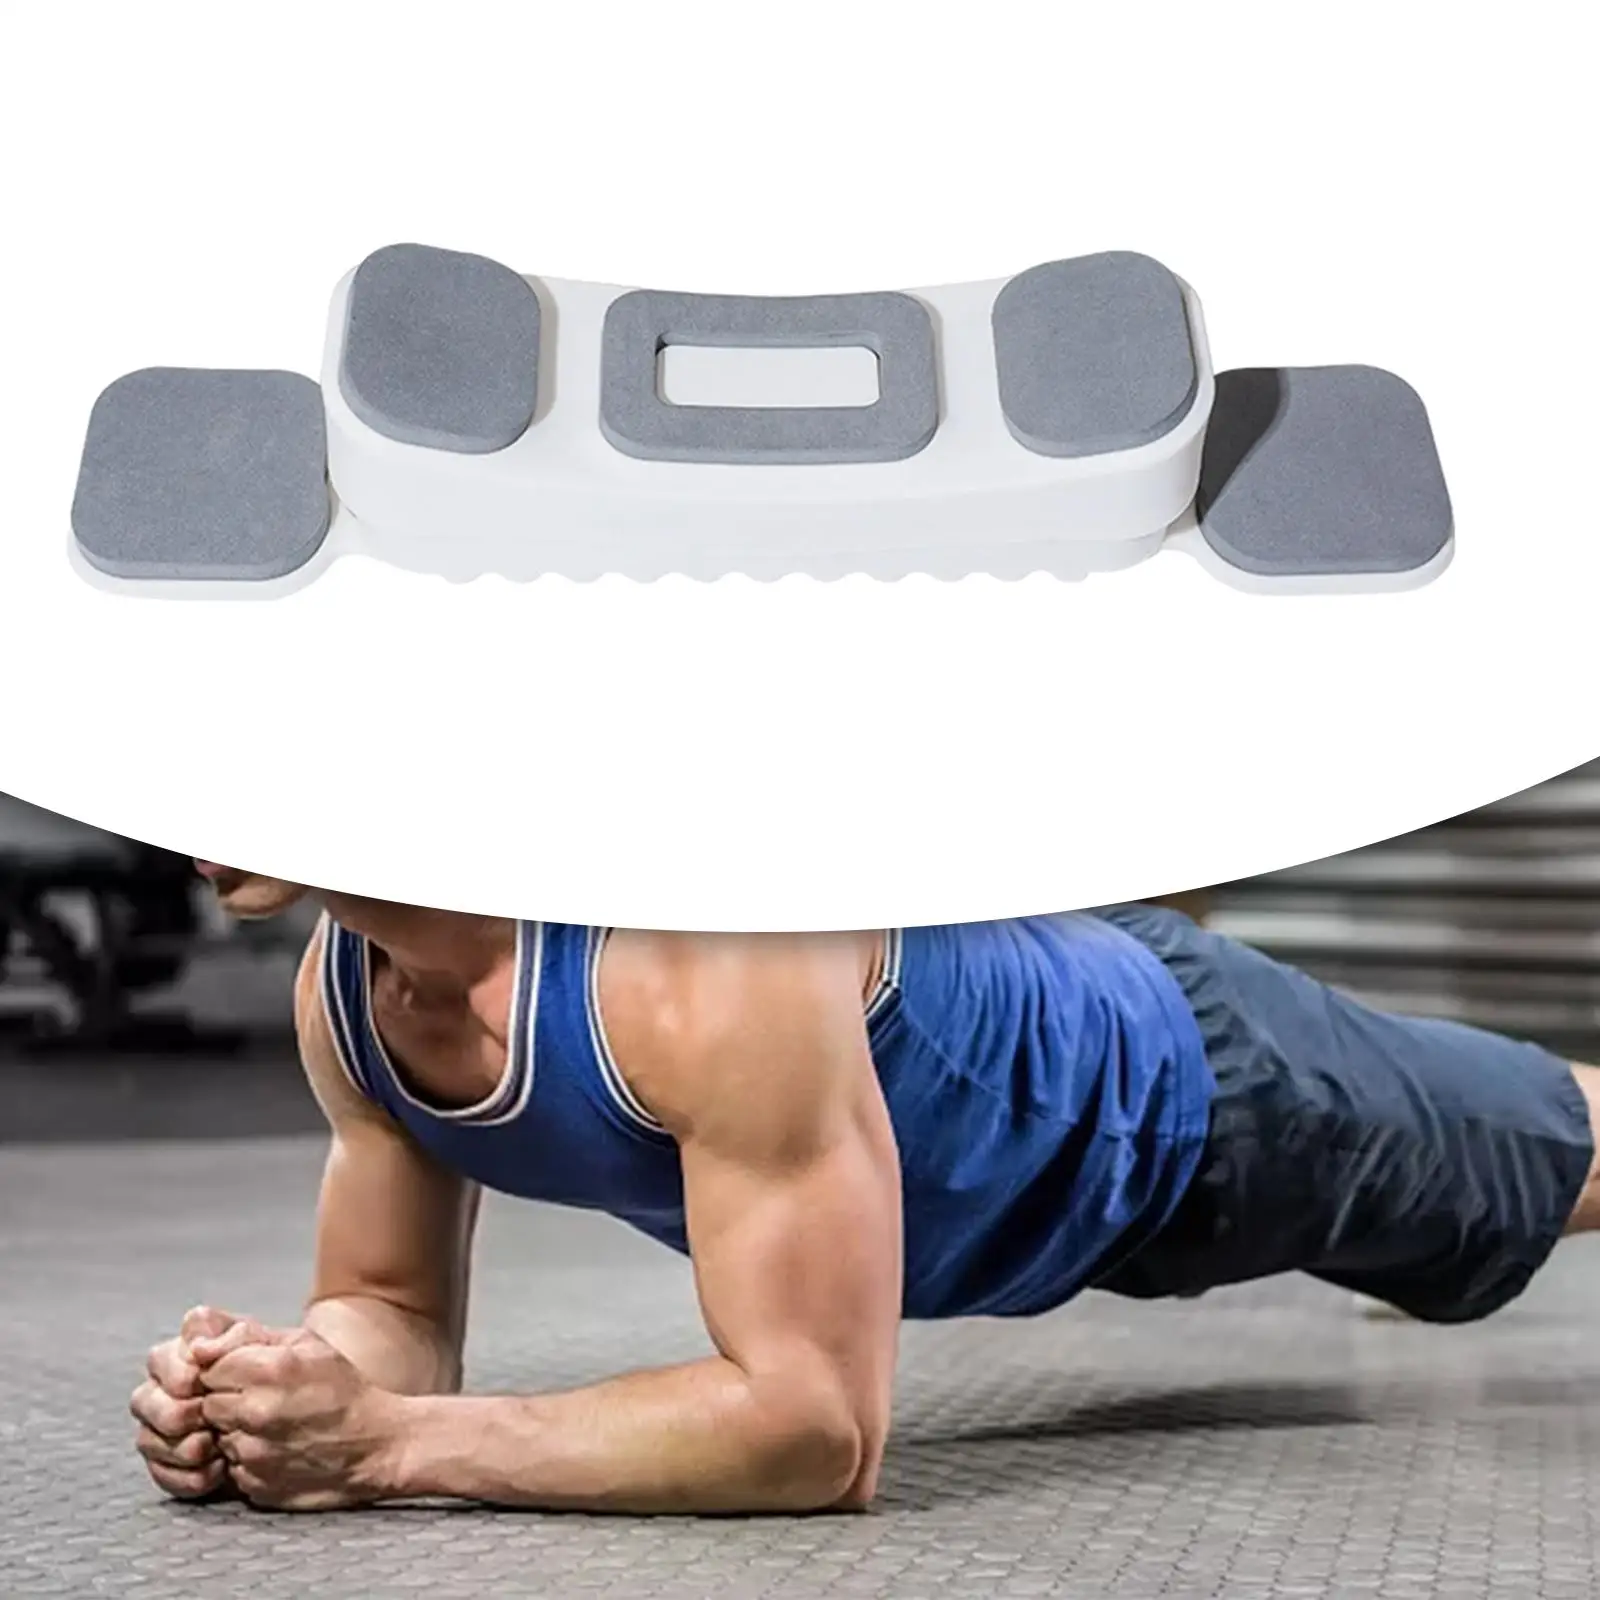 Trainer Support with Non Slip Bottom Durable for Chest Muscle Fitness